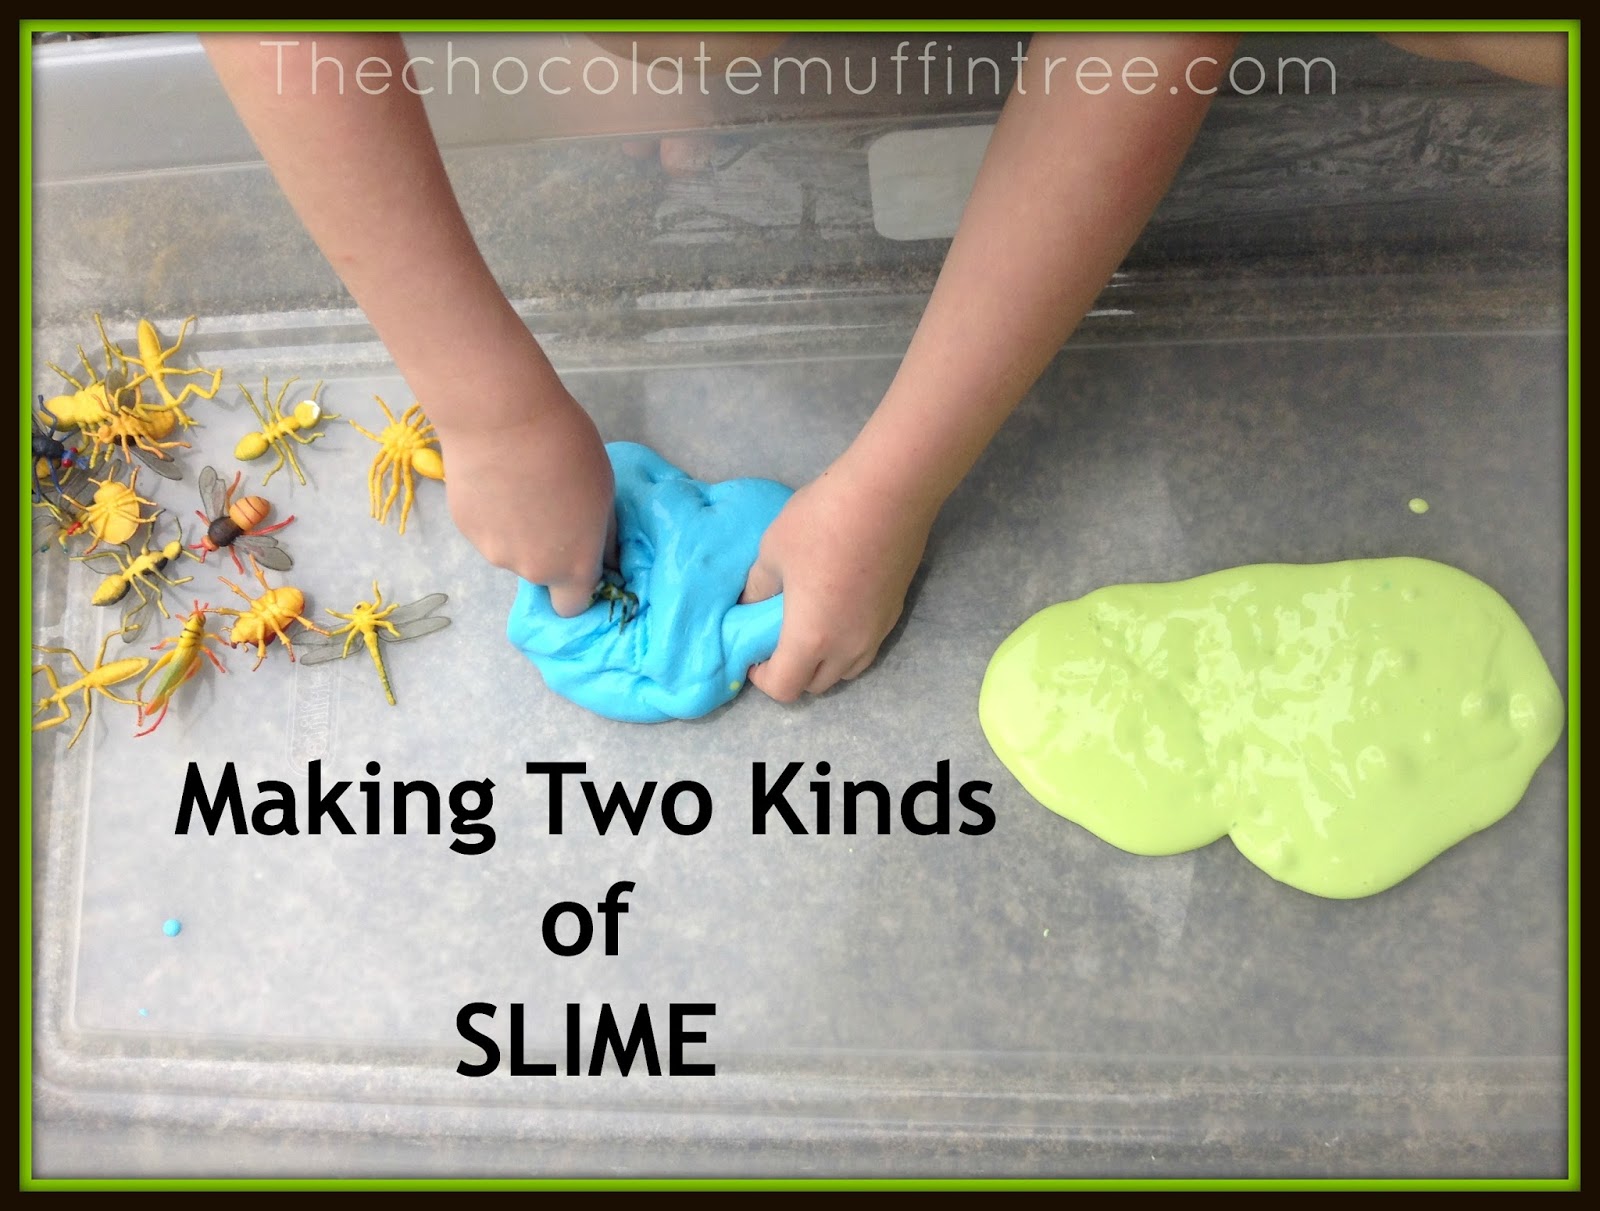 How to make slime? Find two recipes for different kind of slime